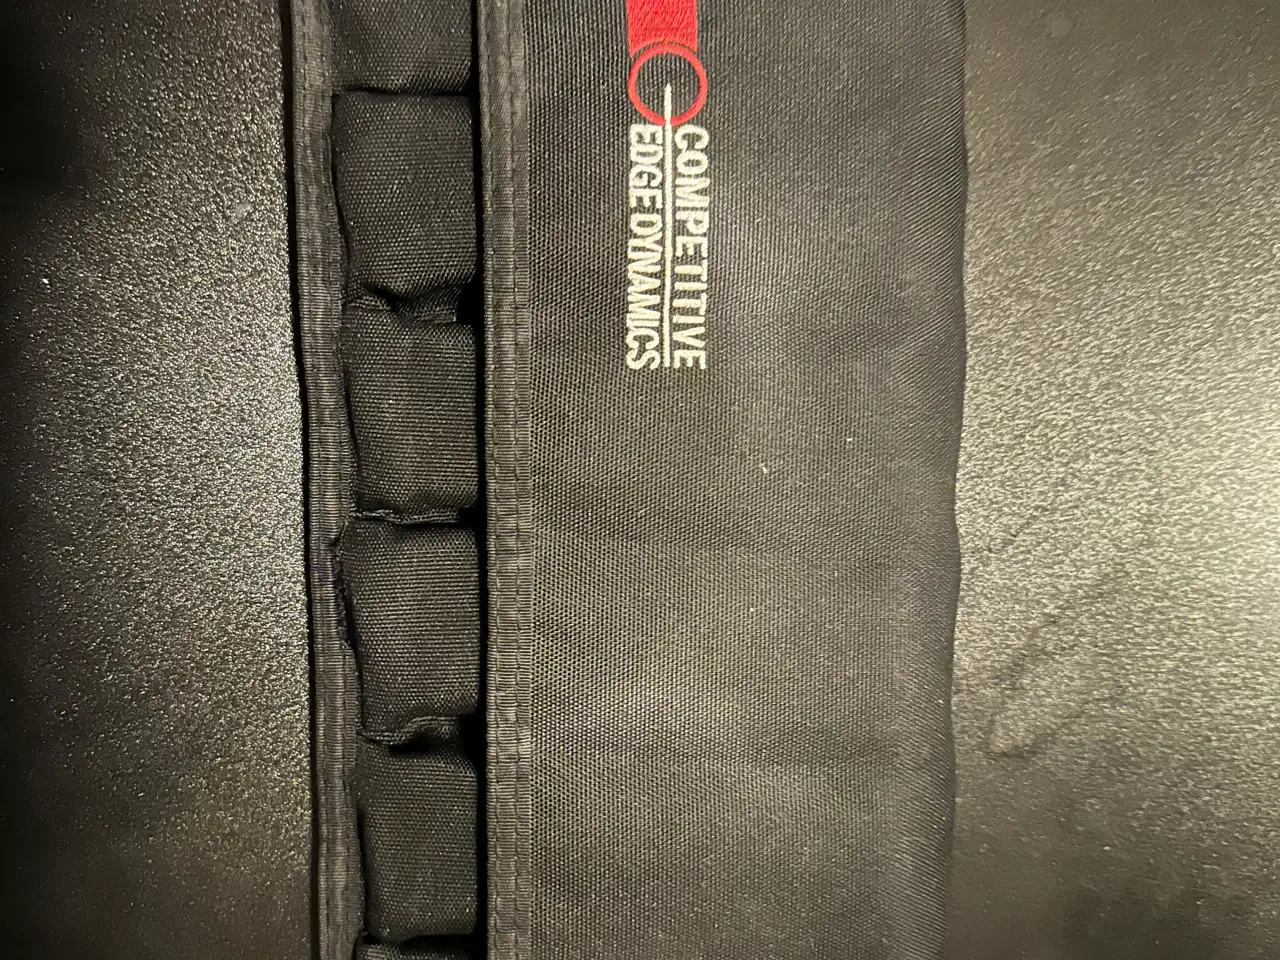 Billede 4 - 2011 SPS mags & STI mags 